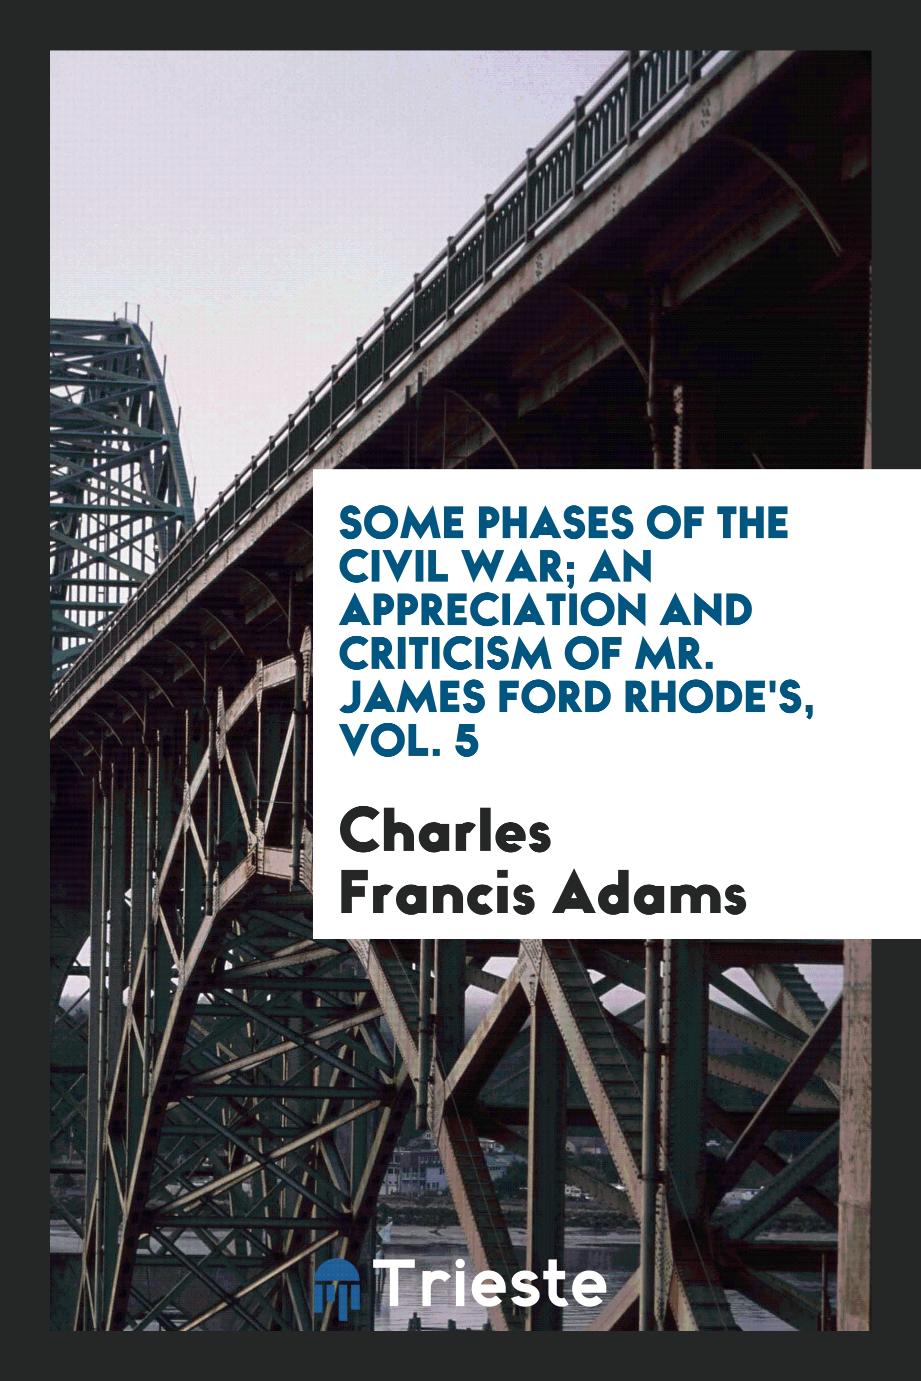 Some phases of the civil war; an appreciation and criticism of Mr. James Ford Rhode's, Vol. 5